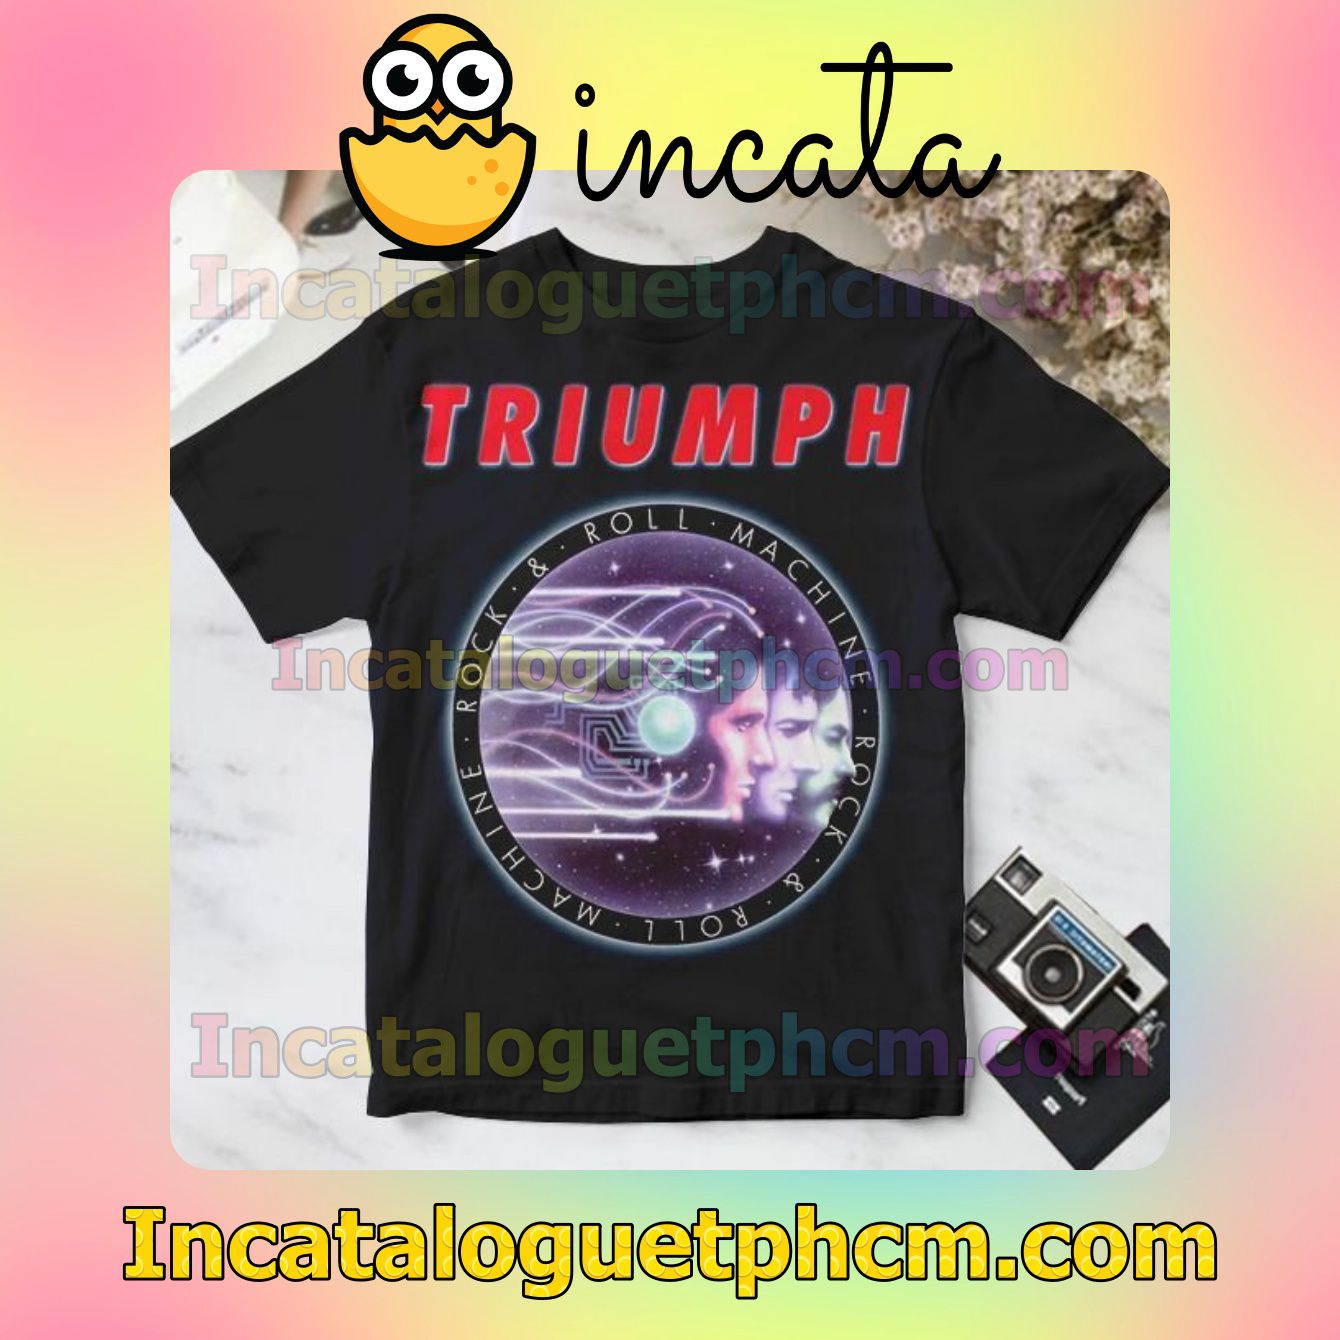 Triumph Rock And Roll Machine Album Cover For Fan Personalized T-Shirt